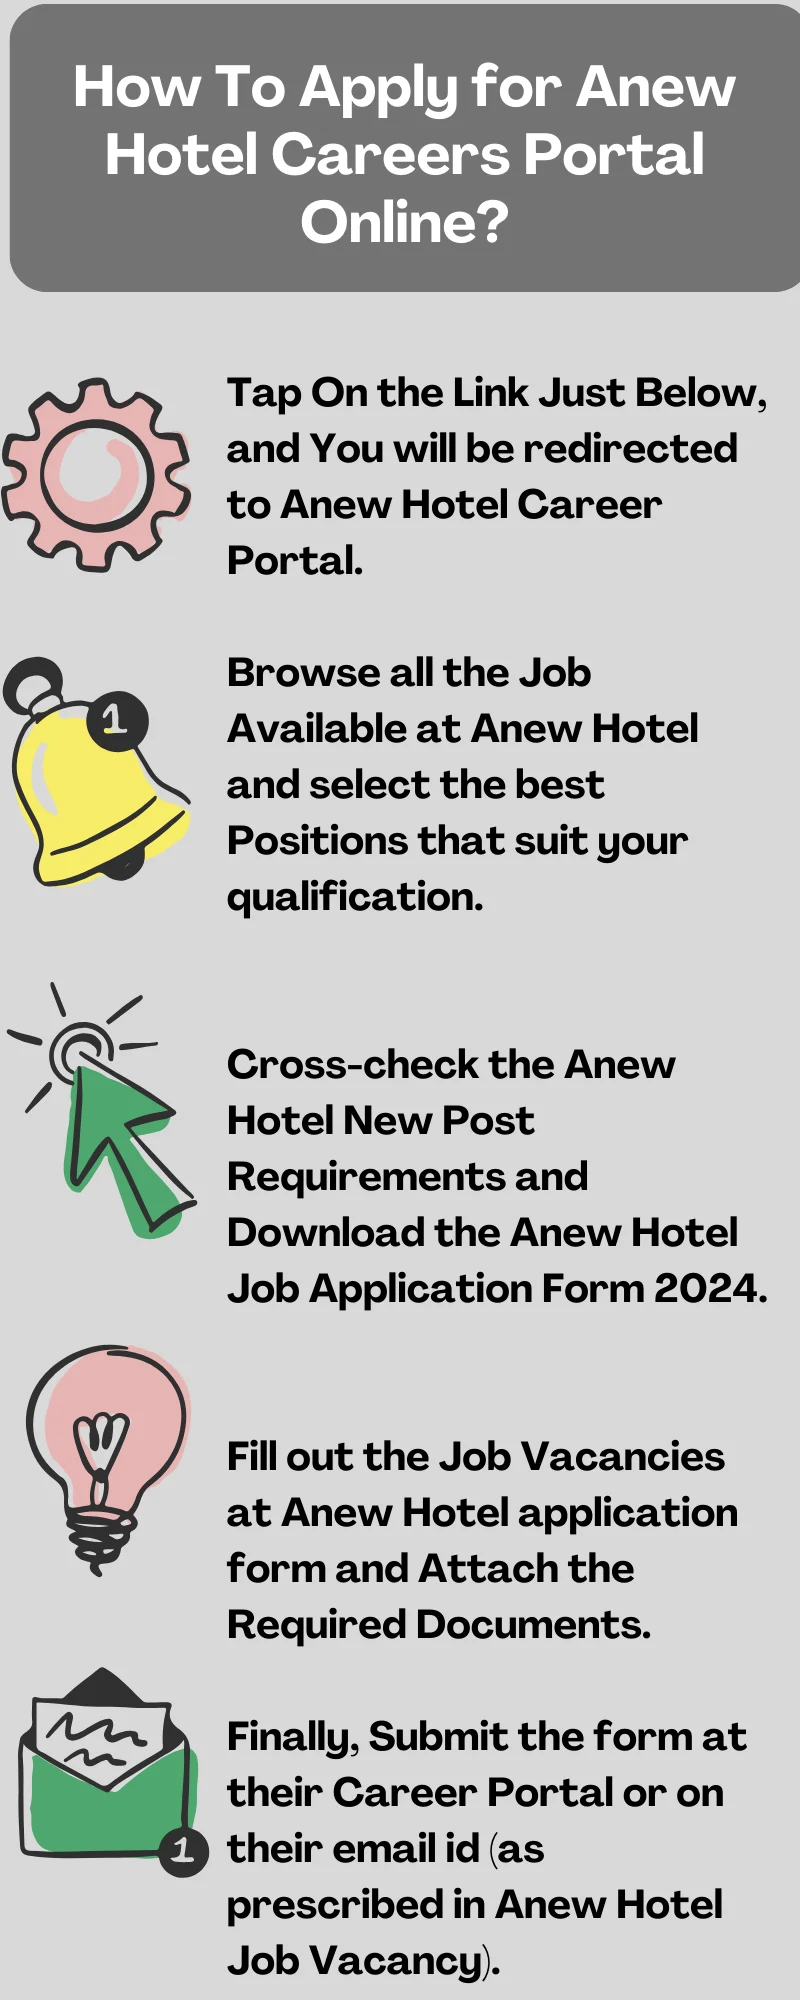 How To Apply for Anew Hotel Careers Portal Online?